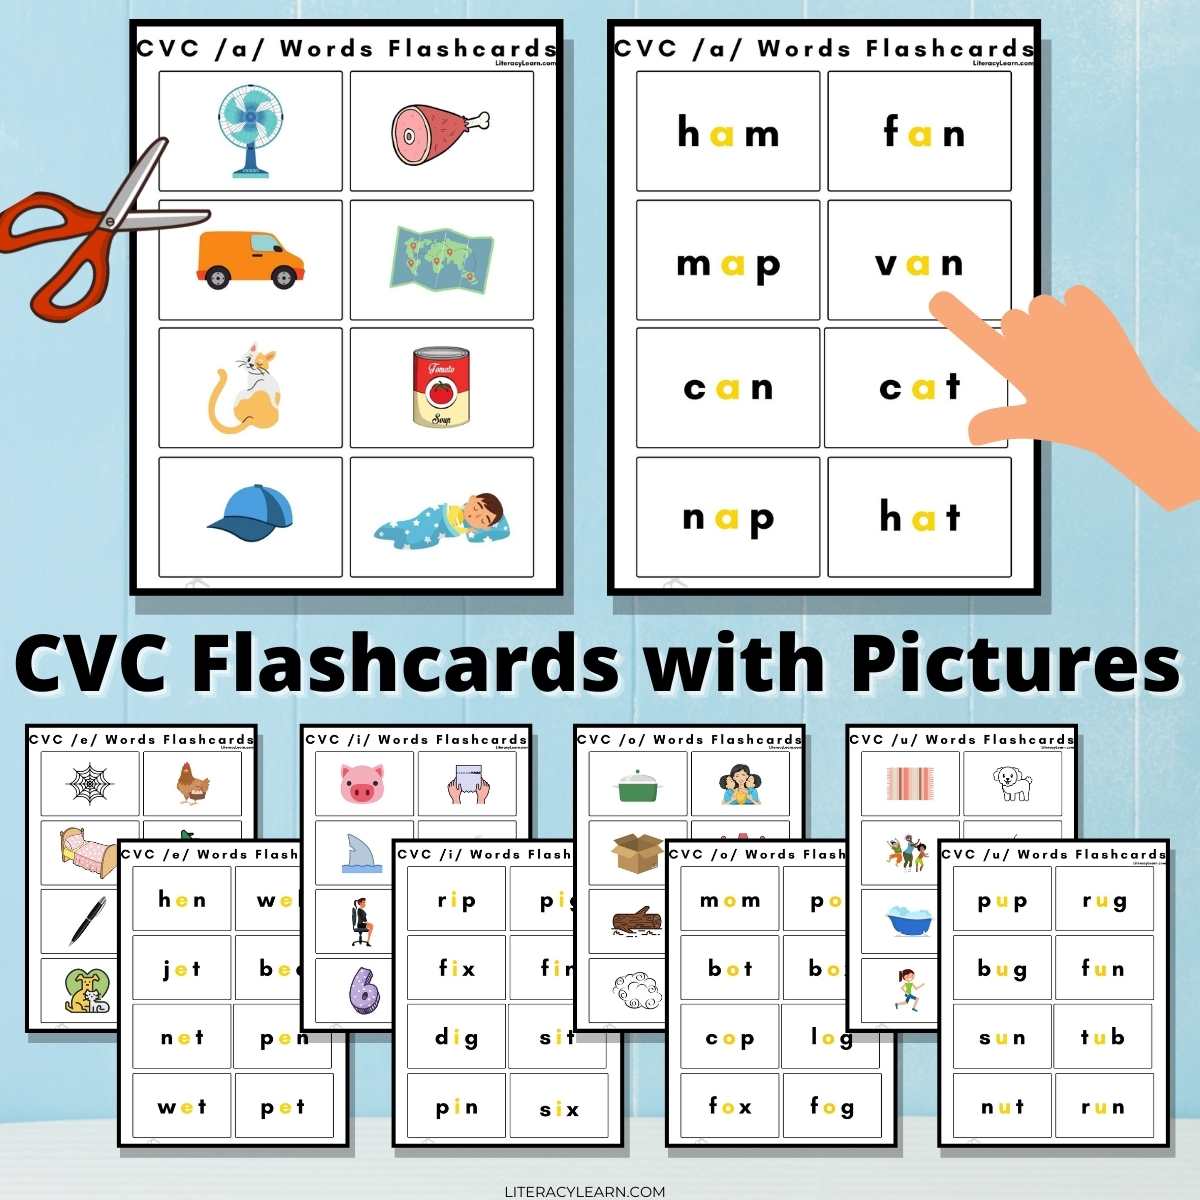 CVC Word Flashcards with Pictures Free Printables Literacy Learn